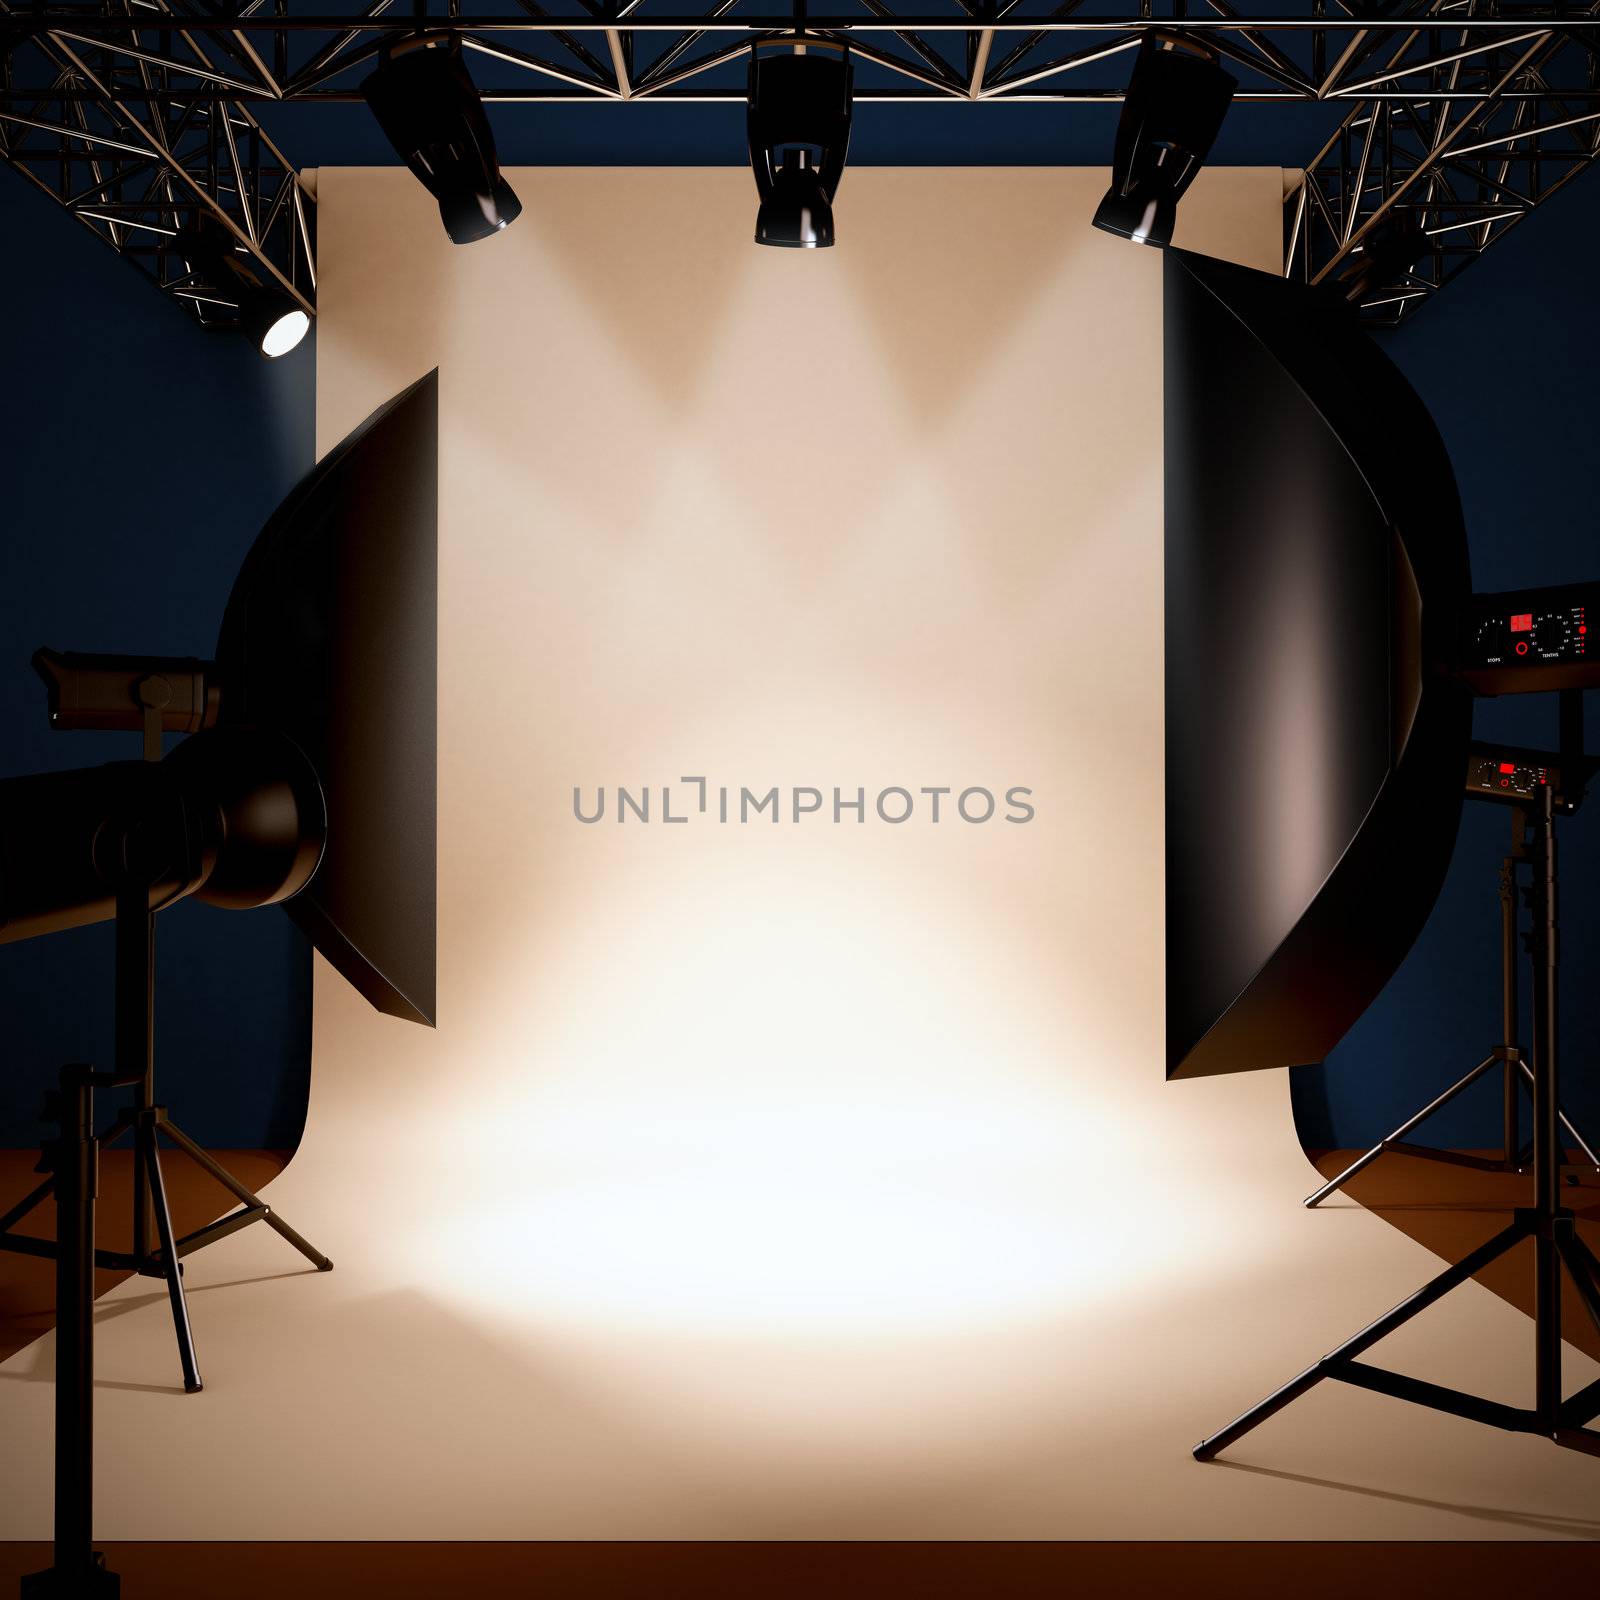 A 3d illustration of a photo studio background template.